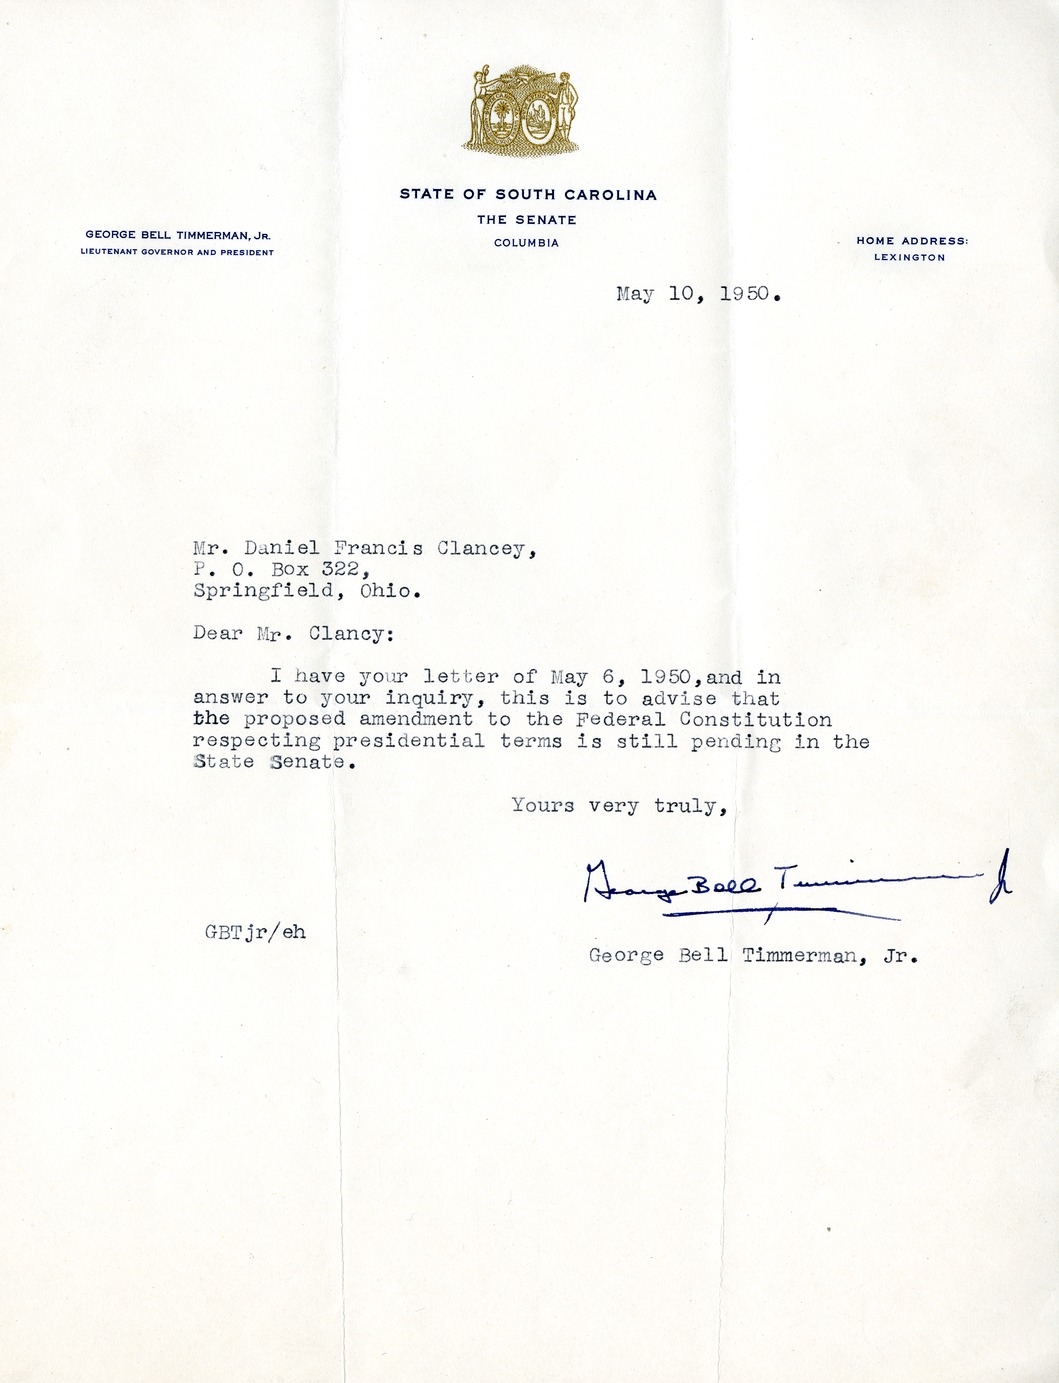 letter from George Bell Timmerman, Jr. to Daniel F. Clancy